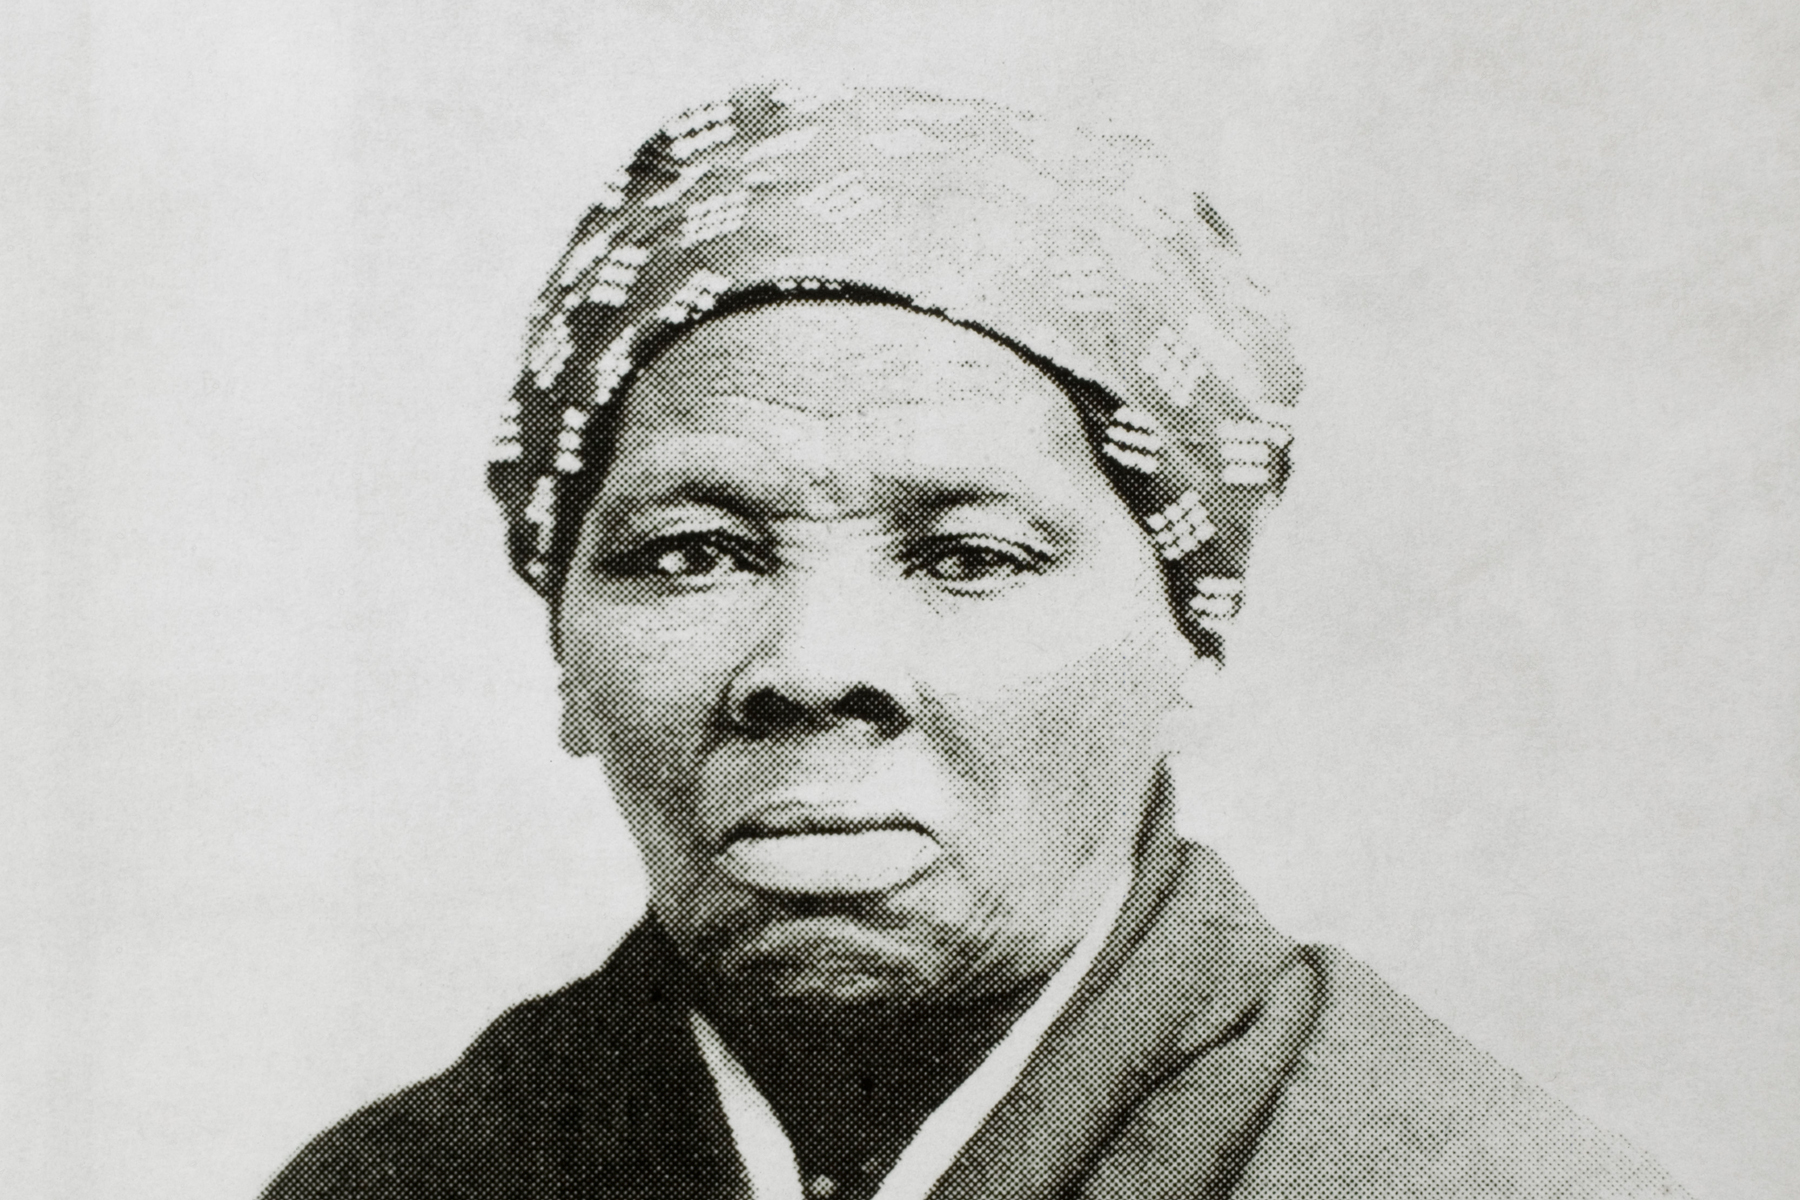 Civil War facts - Harriet Tubman escaped slavery in the southern states, then returned again and again to rescue 70 more enslaved people. Then later, after the Fugitive Slave Act was passed, she helped guide fugitives farther north into Canada. During the